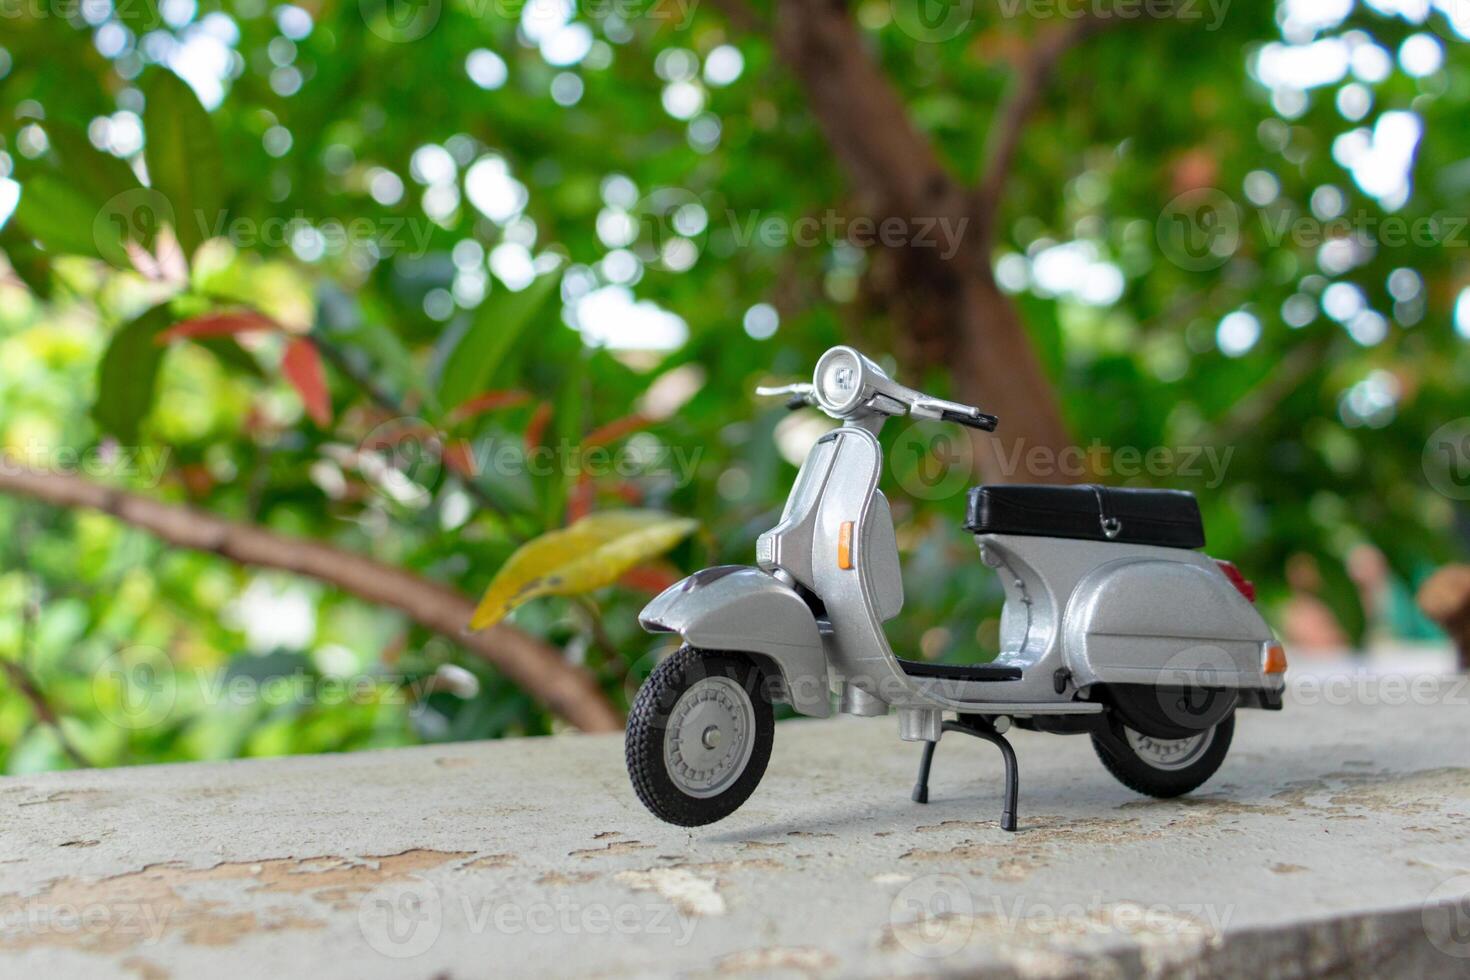 Miniature classic scooter on the cement floor with nature background. After some edits. photo